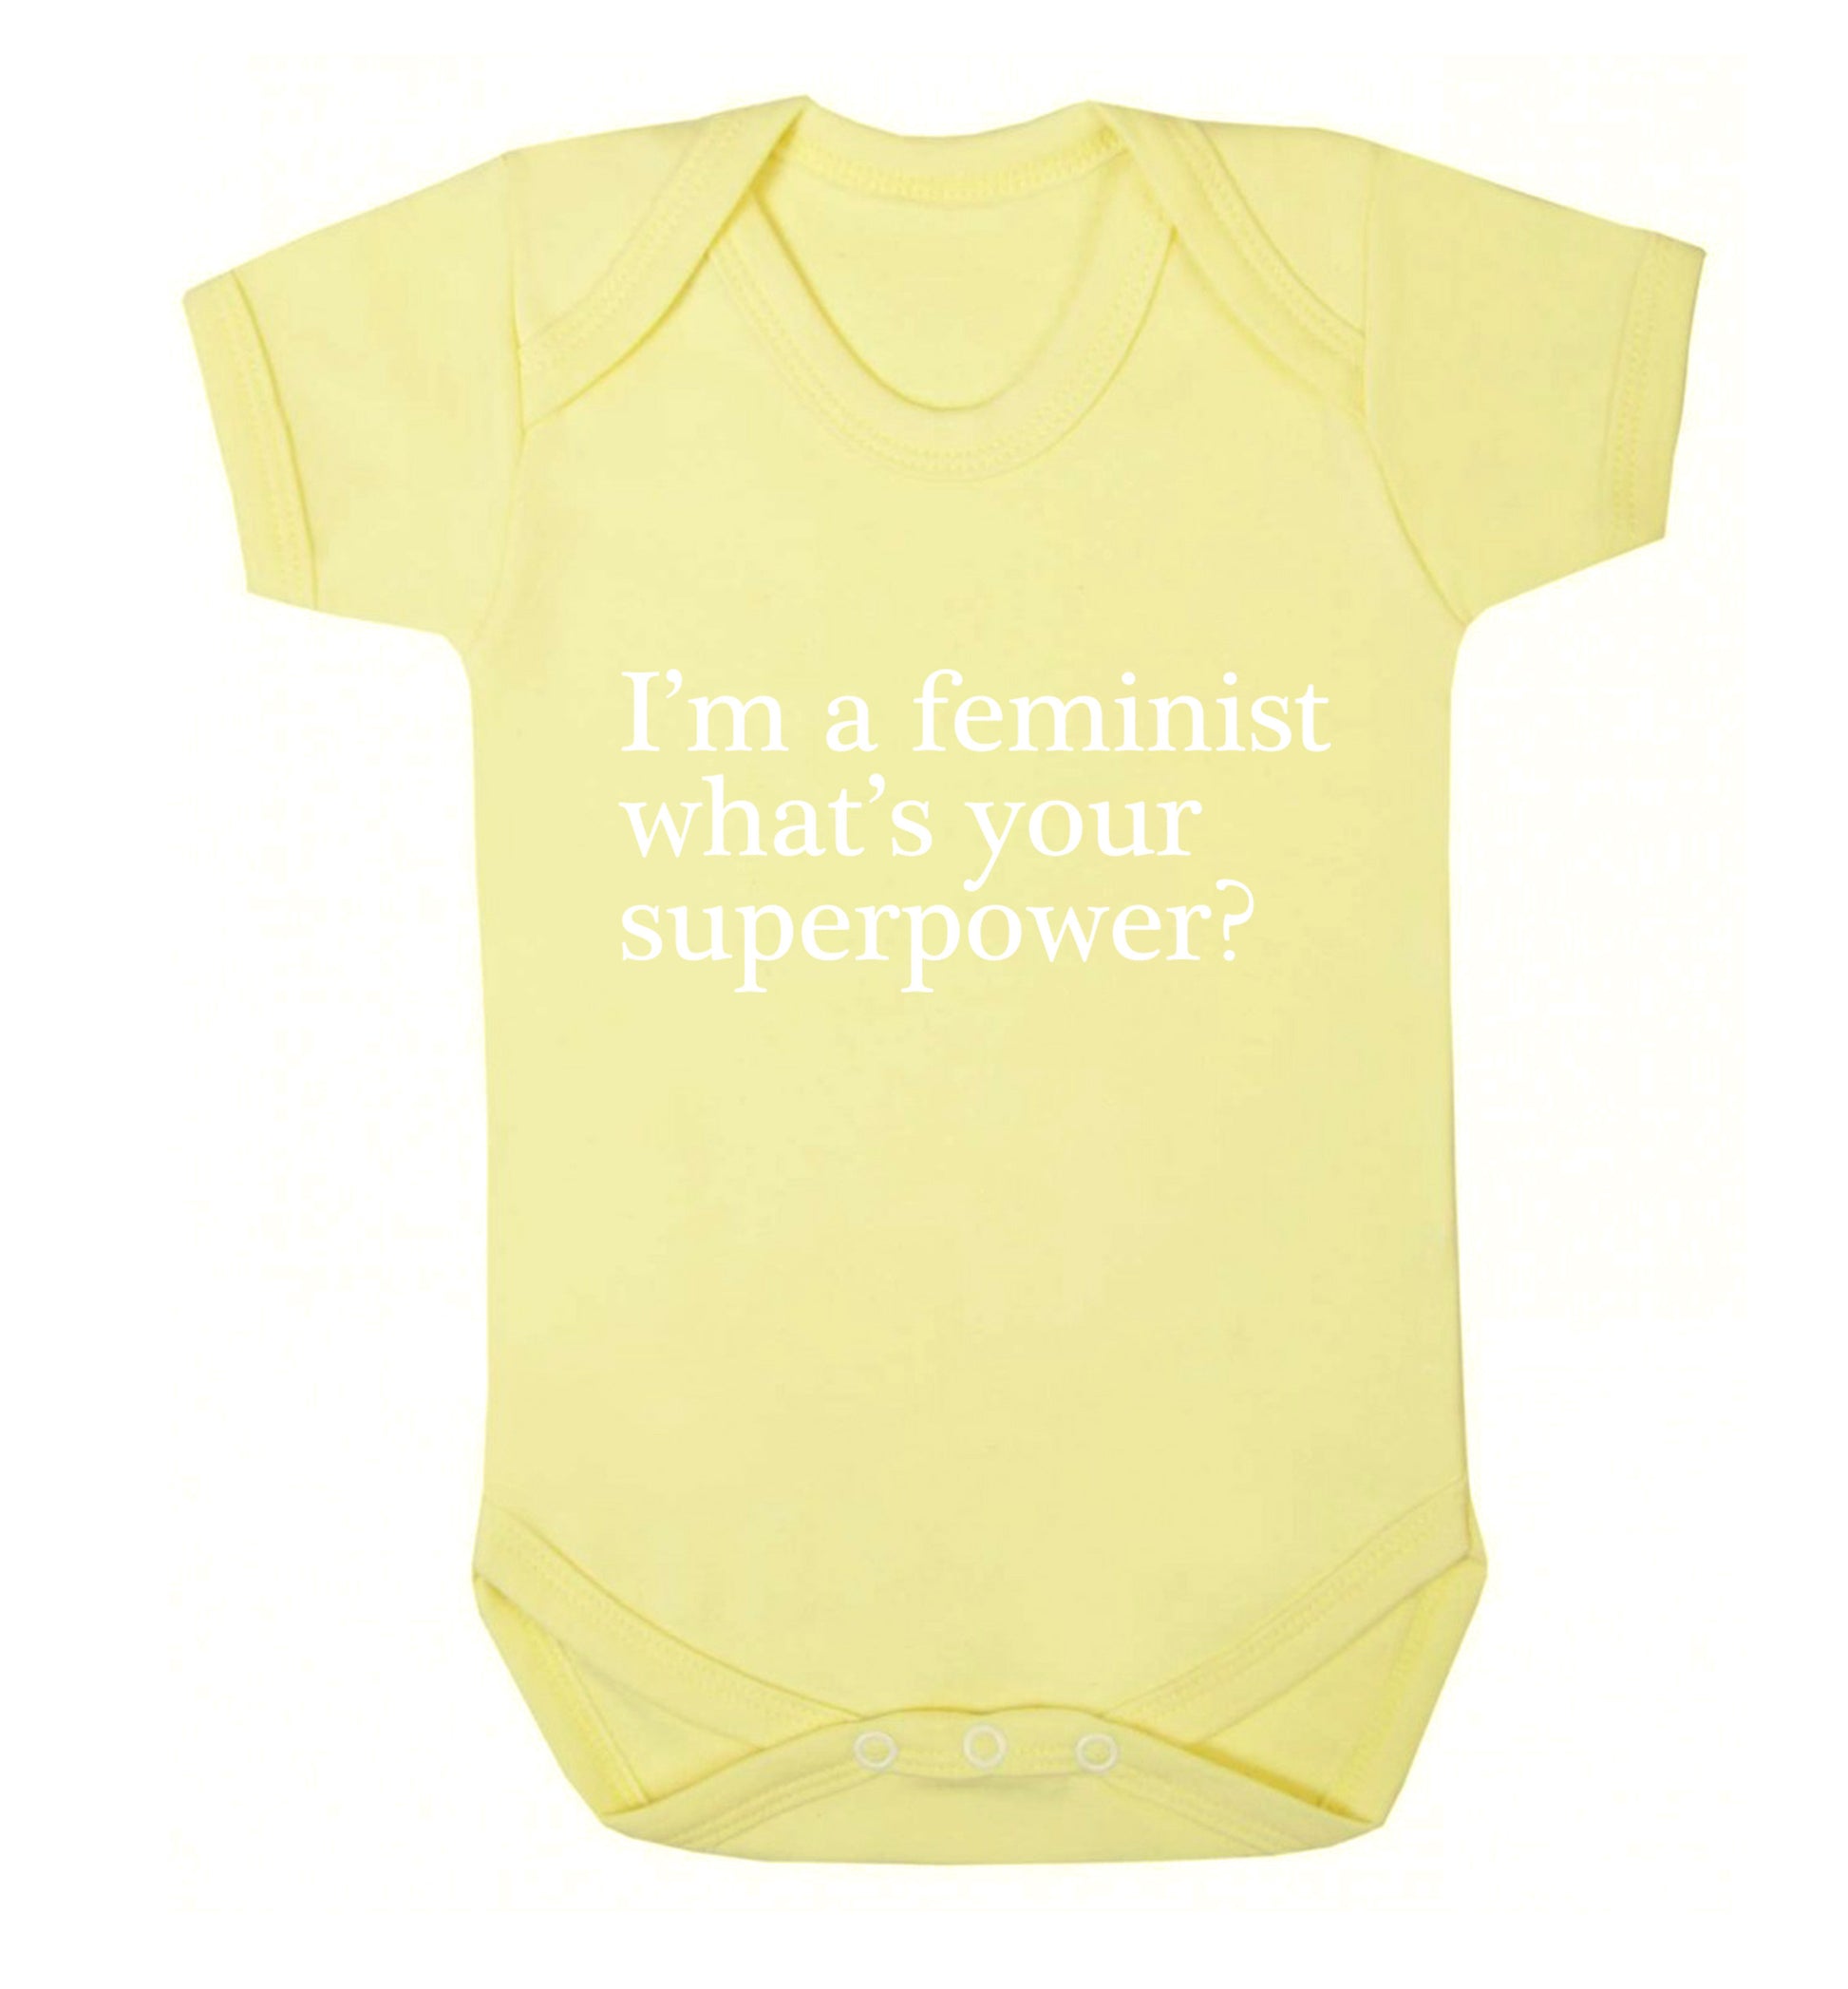 I'm a feminist what's your superpower? Baby Vest pale yellow 18-24 months